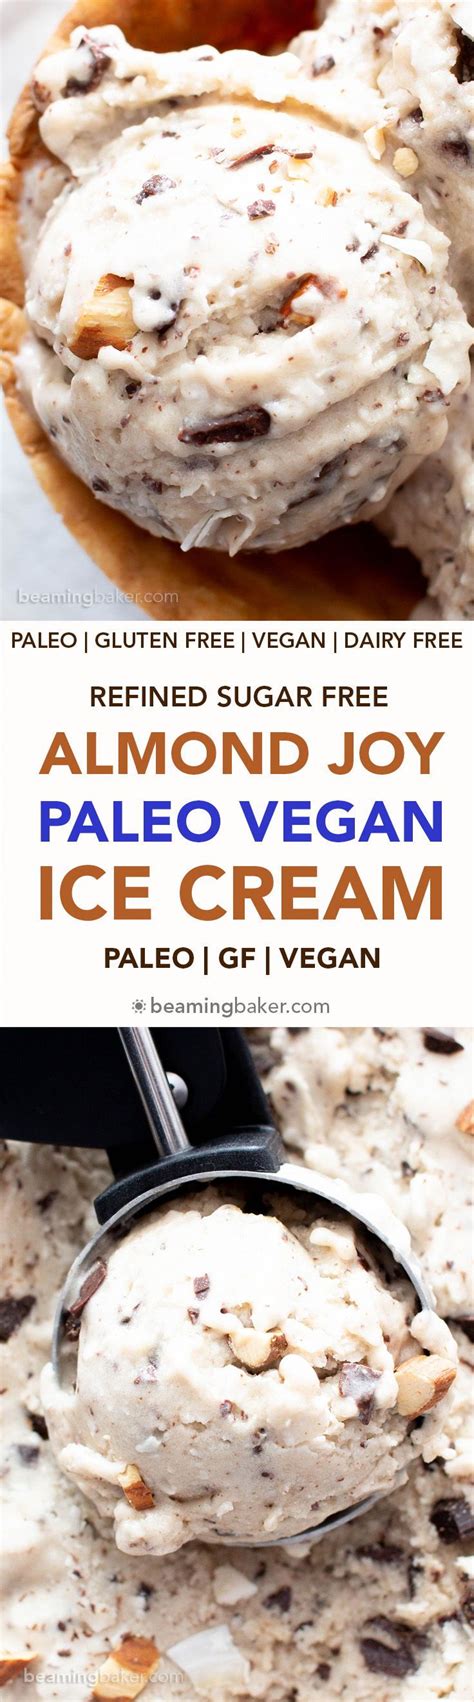 Healthier recipes, from the food and nutrition experts at eatingwell. Almond Joy Vegan Paleo Ice Cream Recipe (Refined Sugar ...